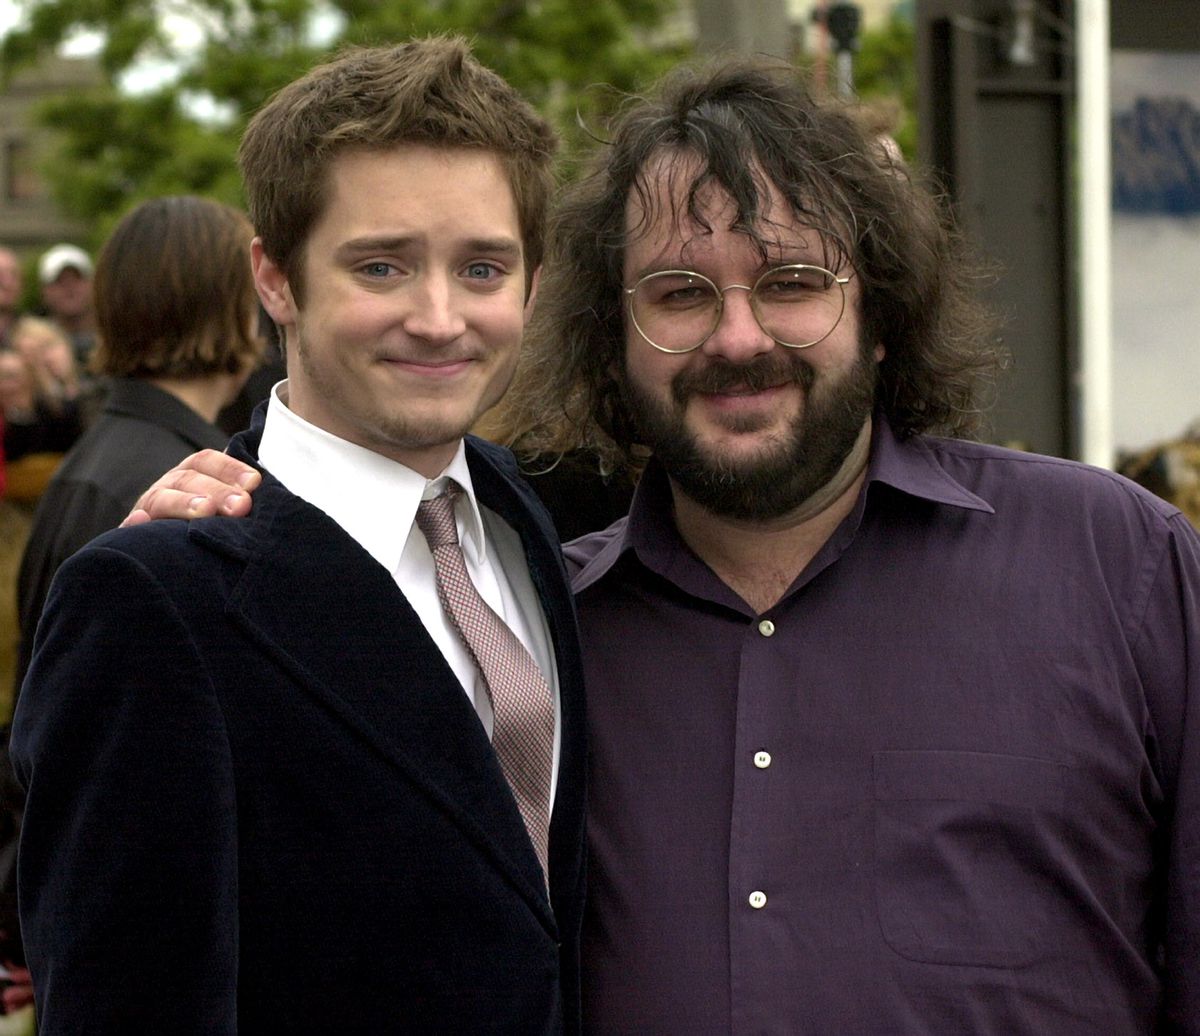 Elijah Wood and Peter Jackson on the red carpet at the Australasian premiere of The Lord of the Rings: The Fellowship of the Ring in Wellington, New Zealand